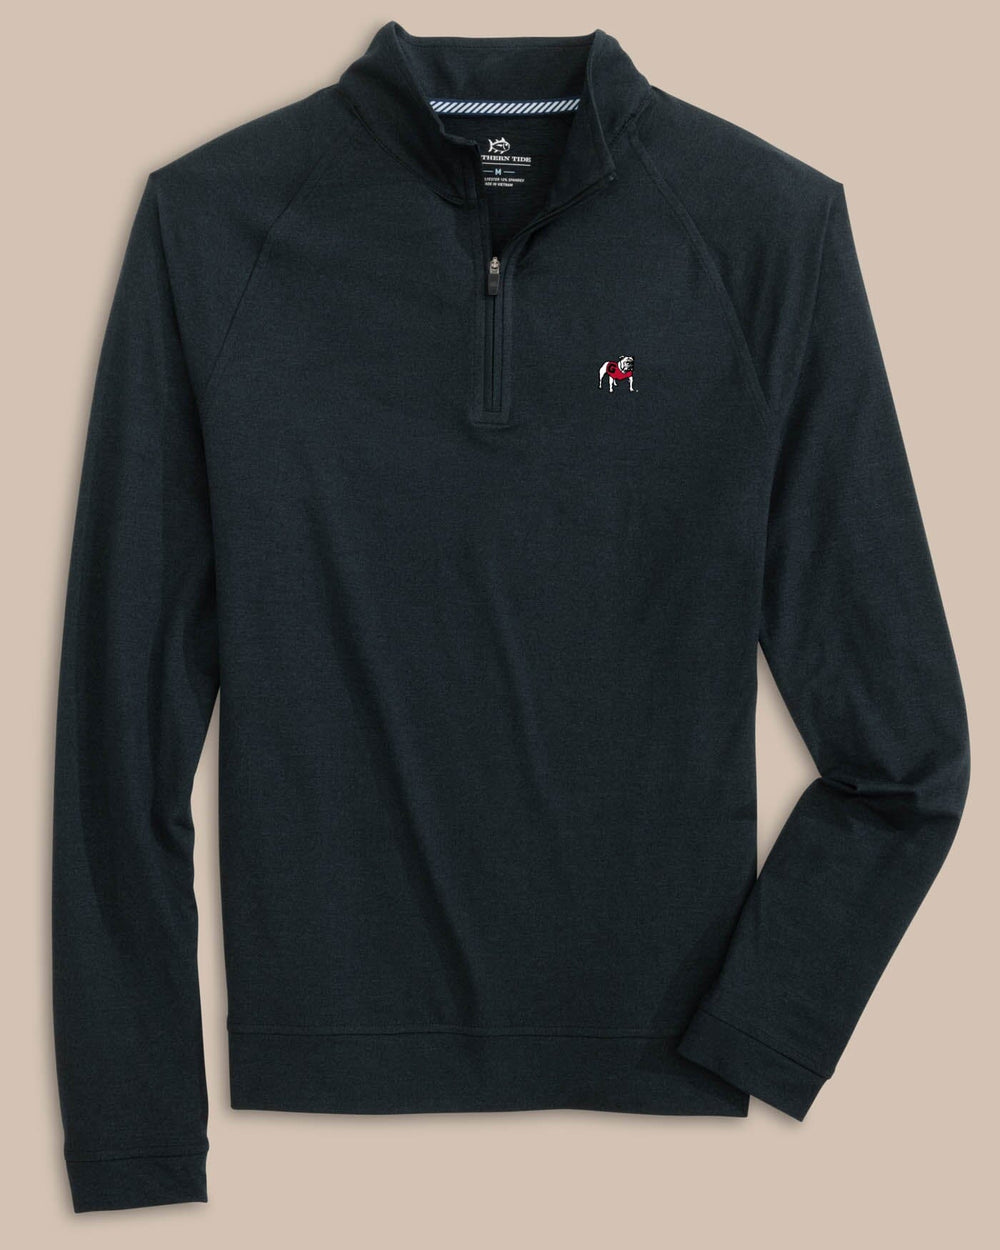 The front view of the Georgia Bulldogs Cruiser Heather Quarter Zip Pullover by Southern Tide - Heather Caviar Black